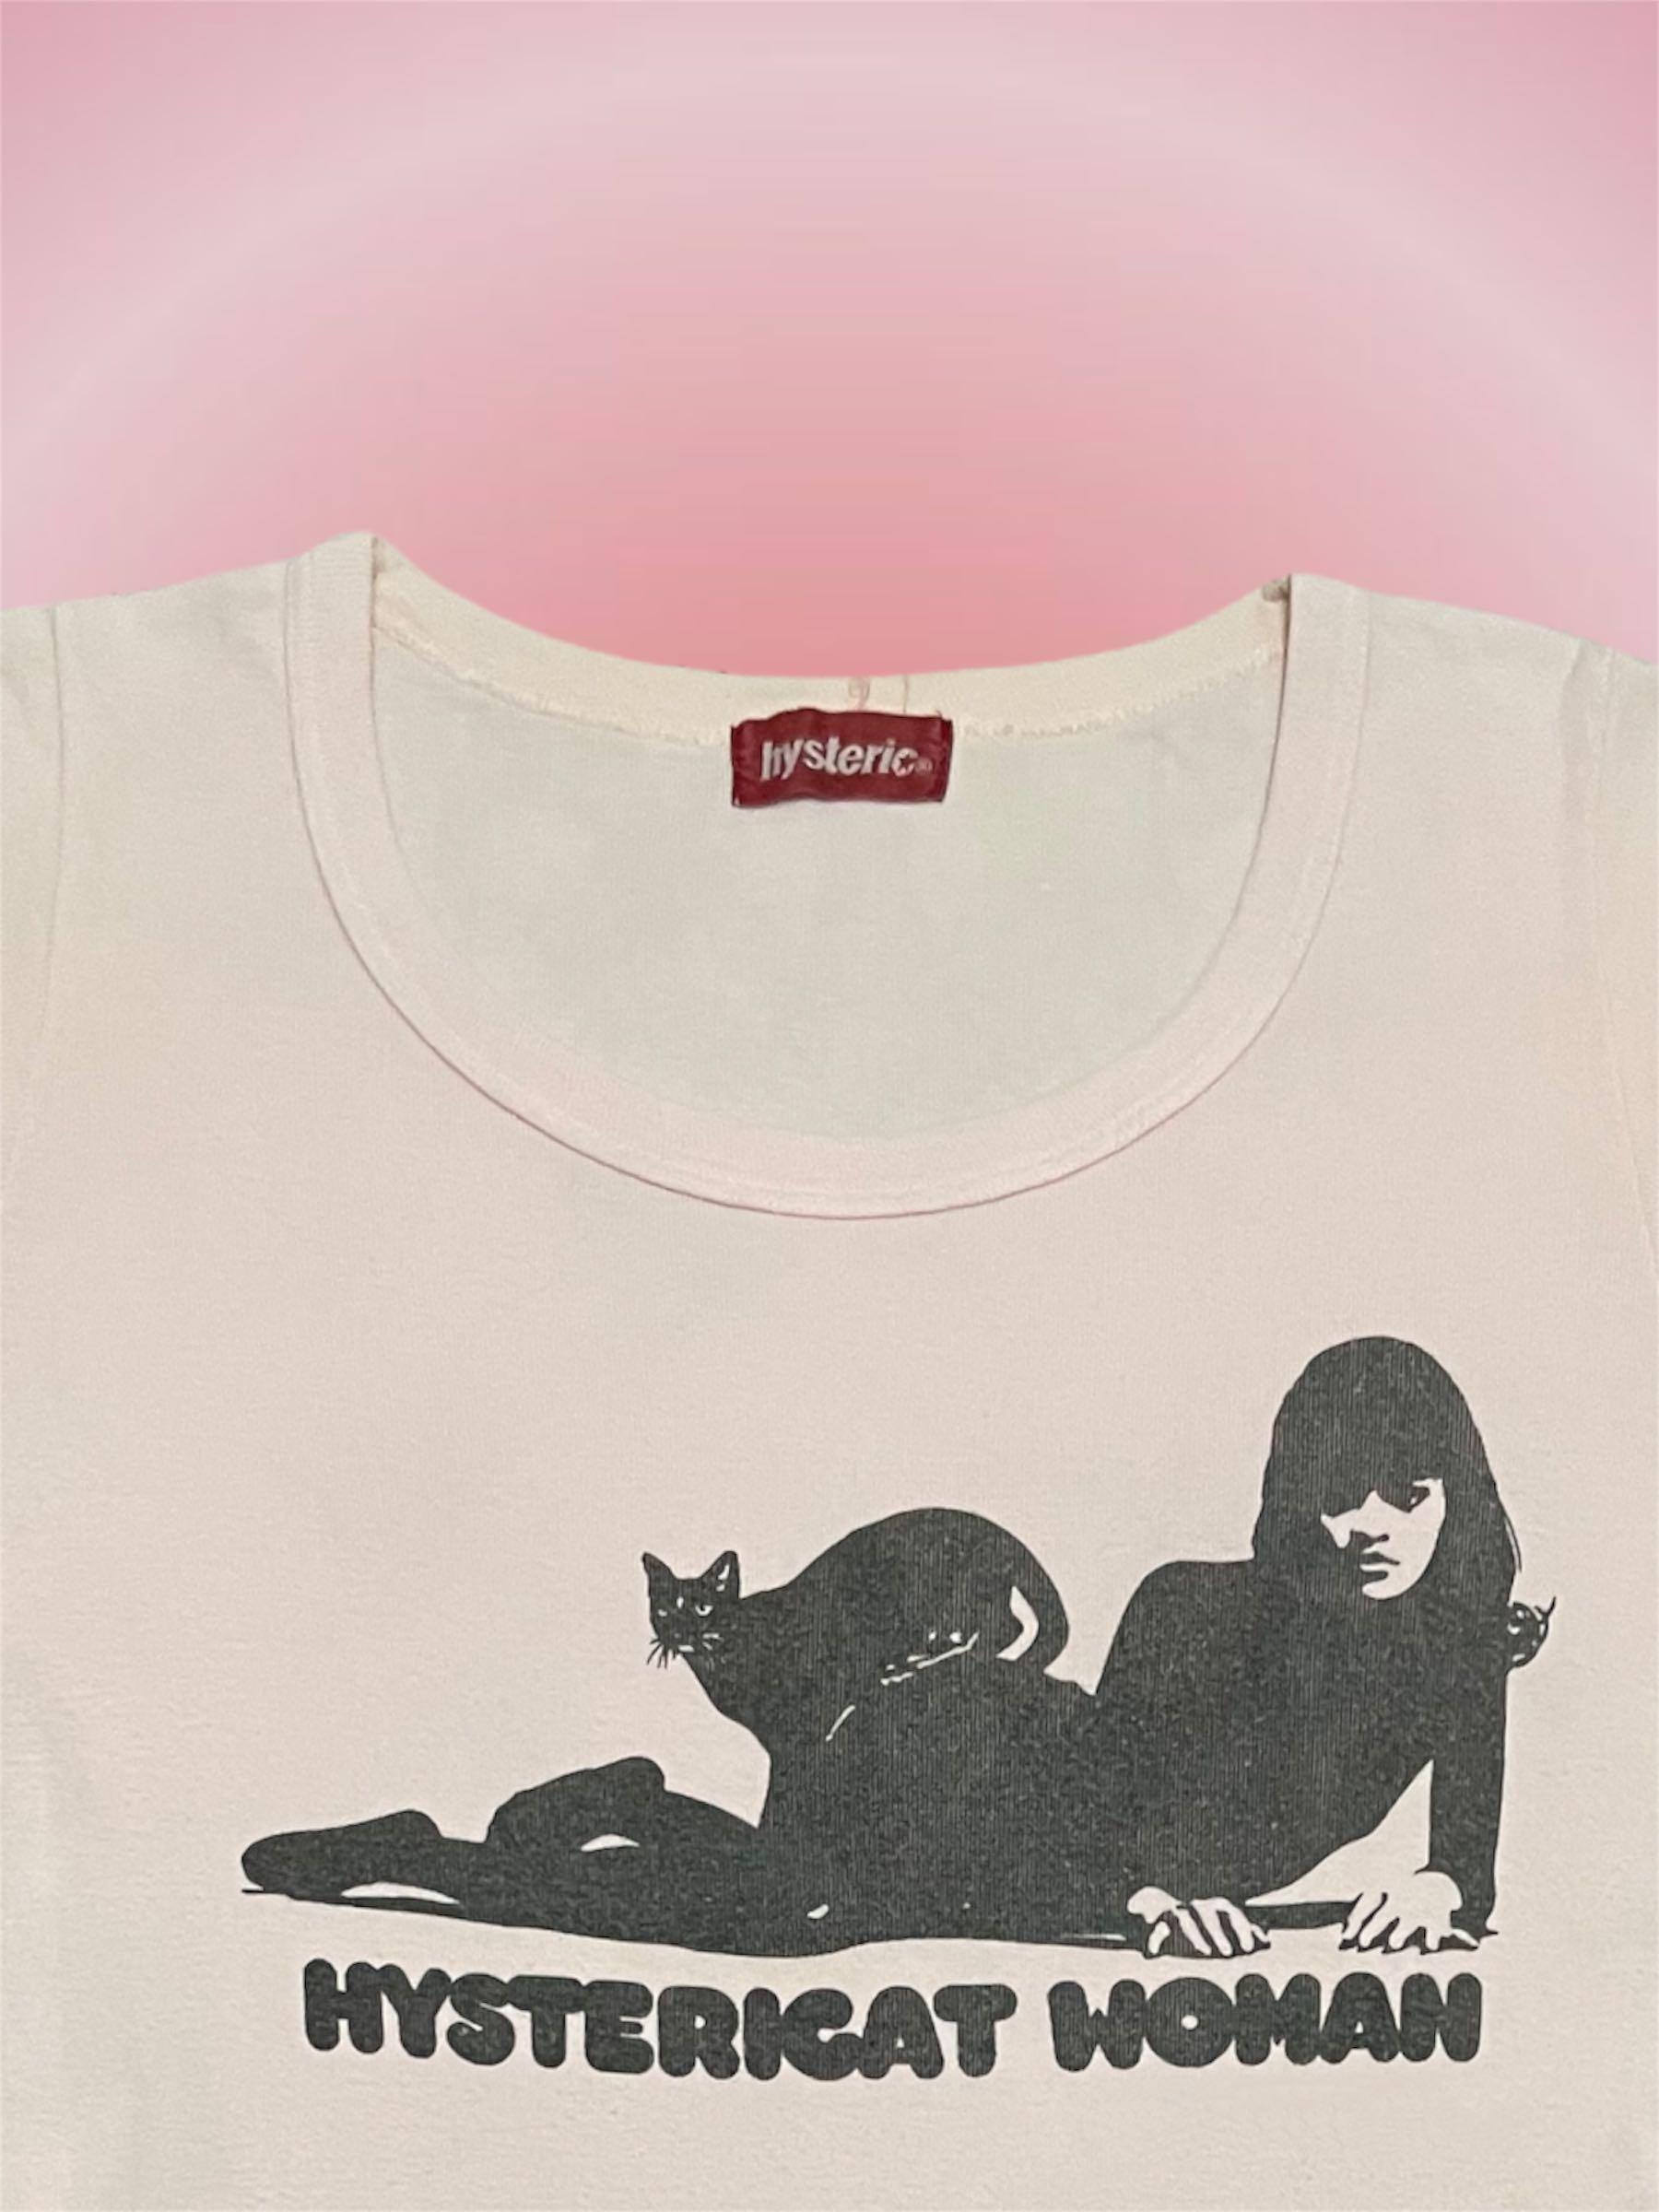 AUTHENTIC Vintage Hysteric Glamour Light Pink Baby Tee with “Hystericat  Woman” Graphic Detail